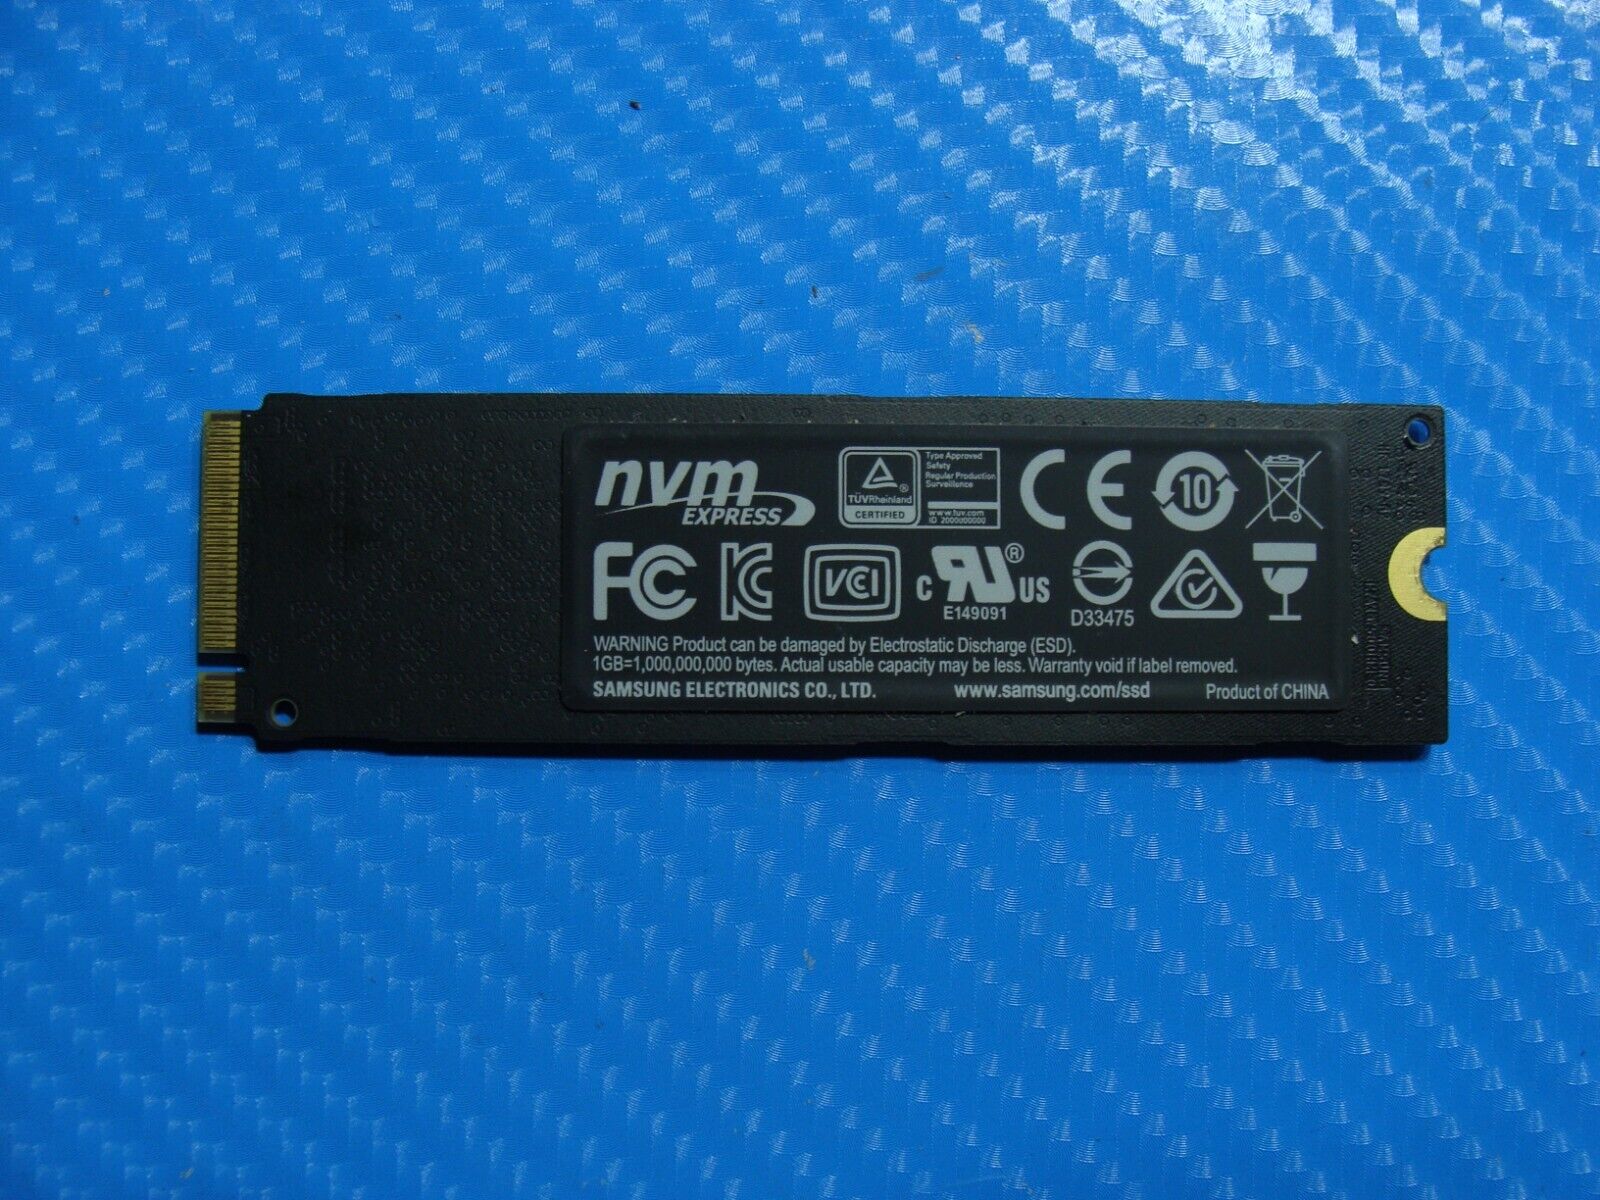 Dell 15 9550 Samsung 500GB M.2 NVMe SSD Solid State Drive MZVLW500HMJP MZ-V6E500